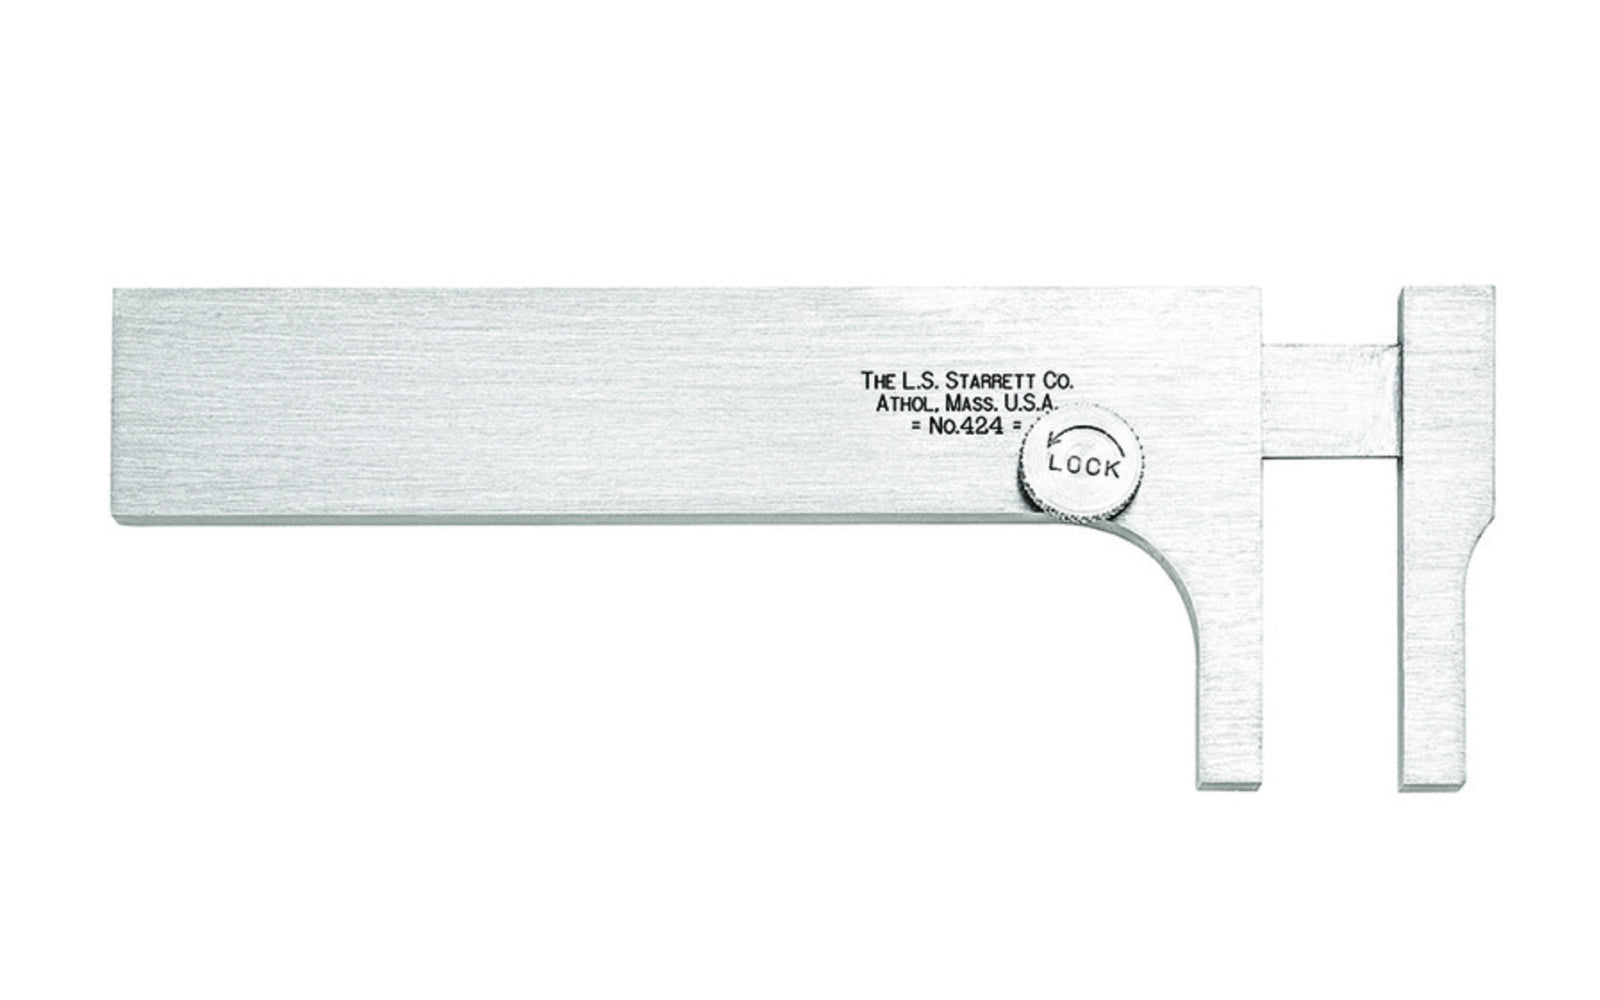 Starrett Circumference Gage. Made of Stainless Steel. Model 424. Made in USA.